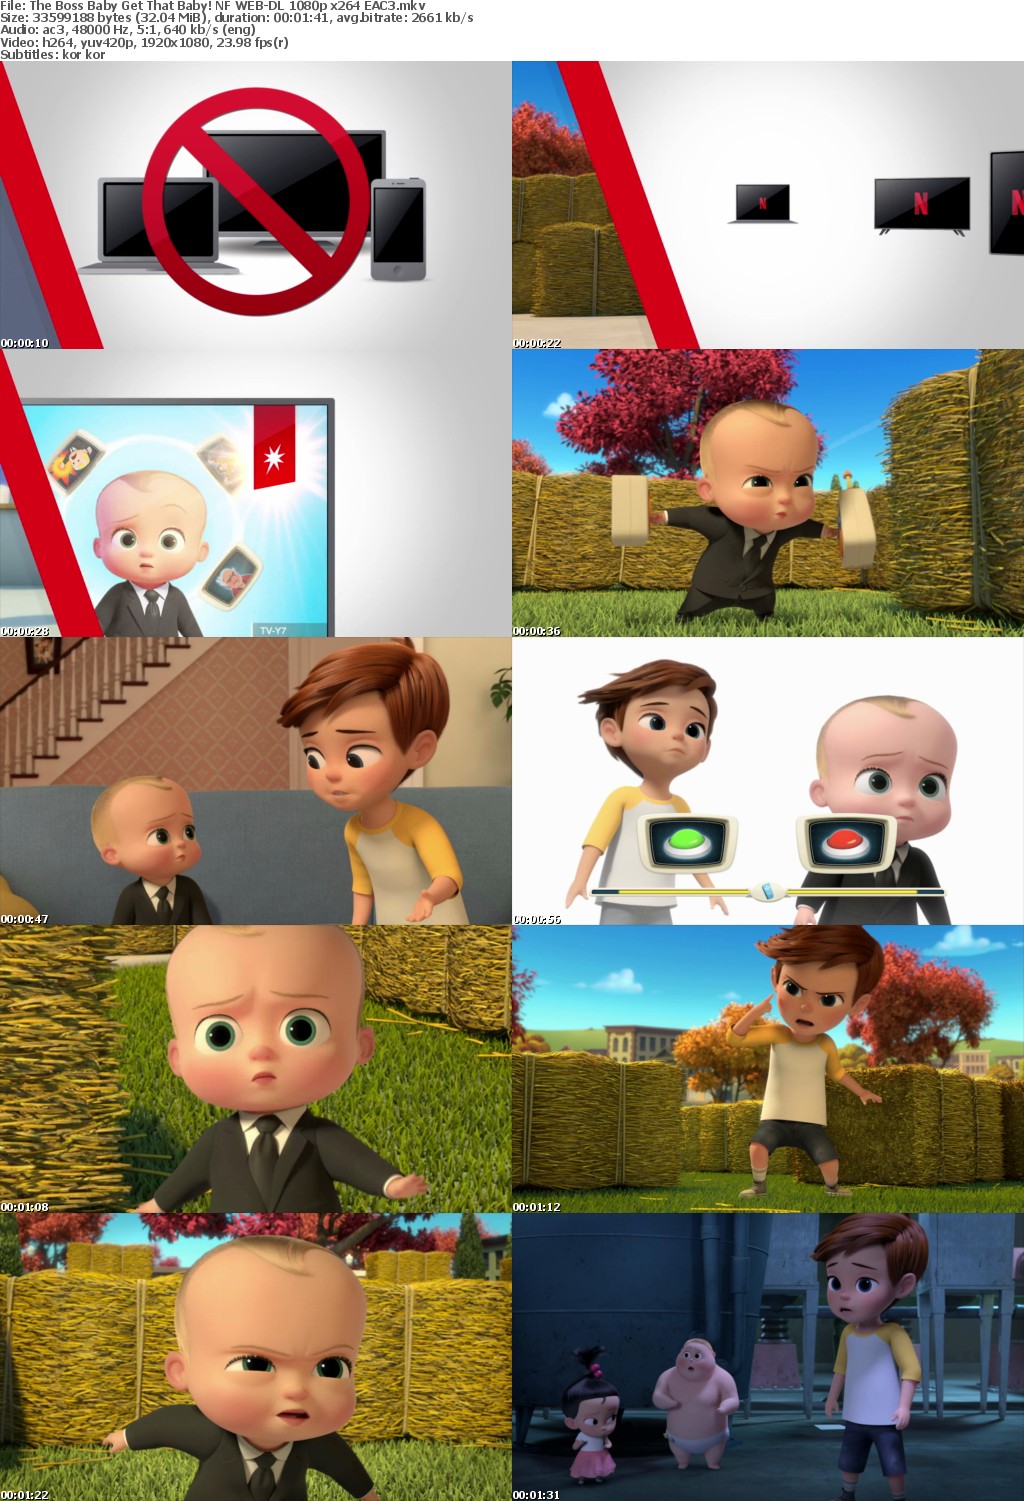 The Boss Baby Get That Baby! NF WEB-DL 1080p x264 EAC3 mkv